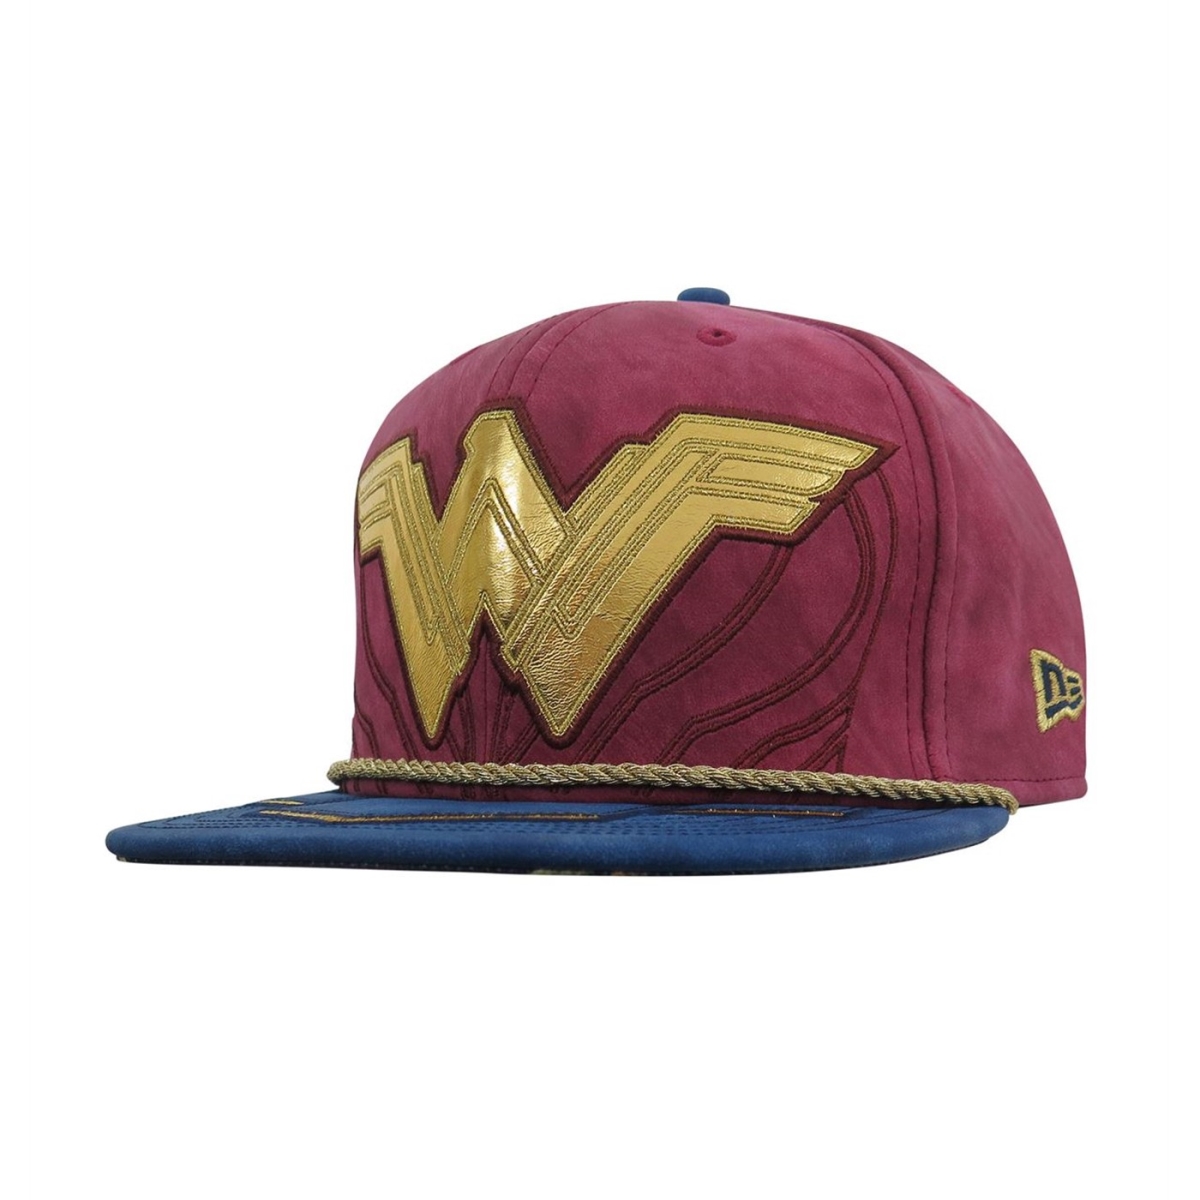 Picture of Wonder Woman hatwwjlarm5950-738-7 3-8 Fitted Wonder Woman Justice League Armor 59Fifty Fitted Hat - Size 7.375